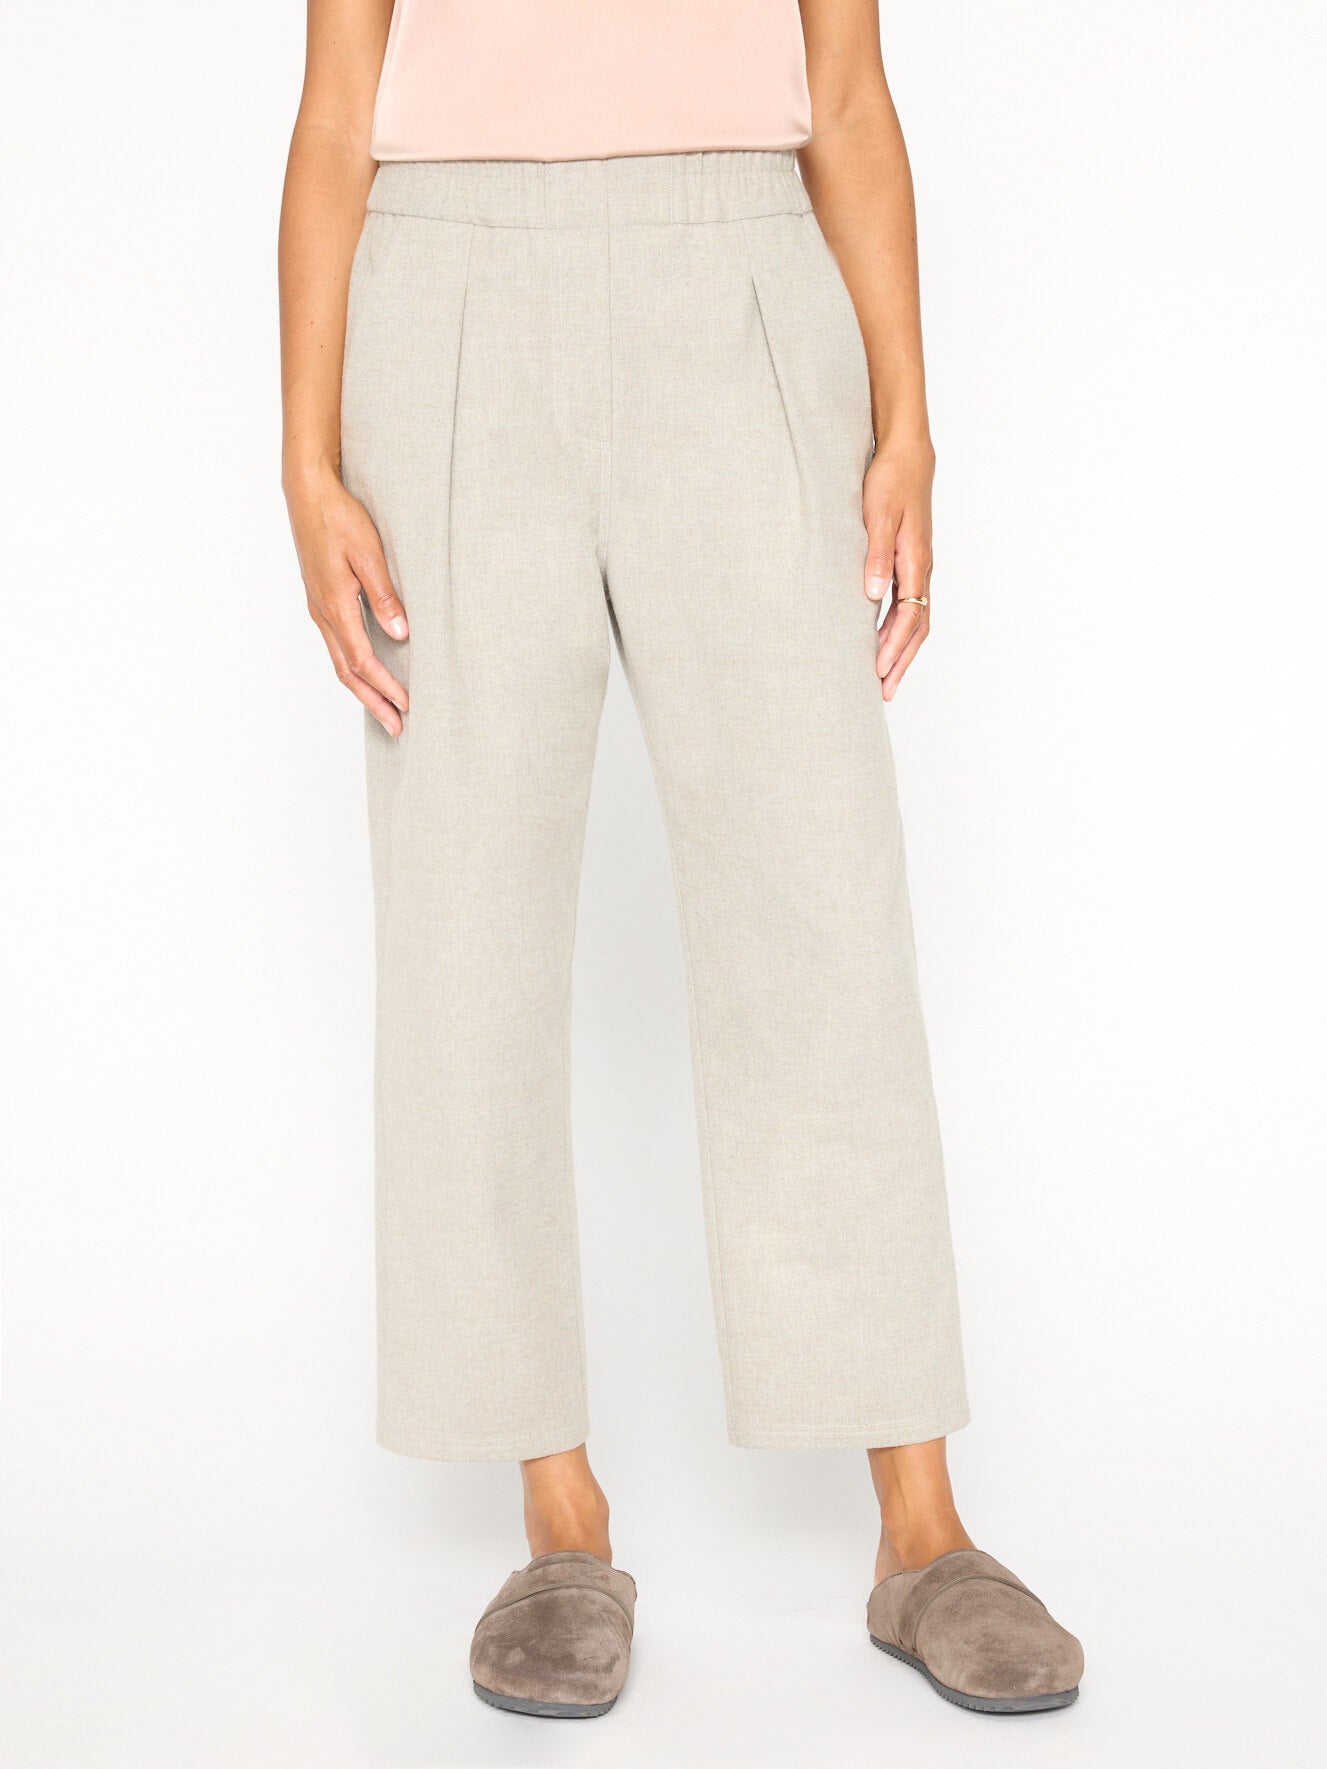 Fiera grey cropped pant front view 2